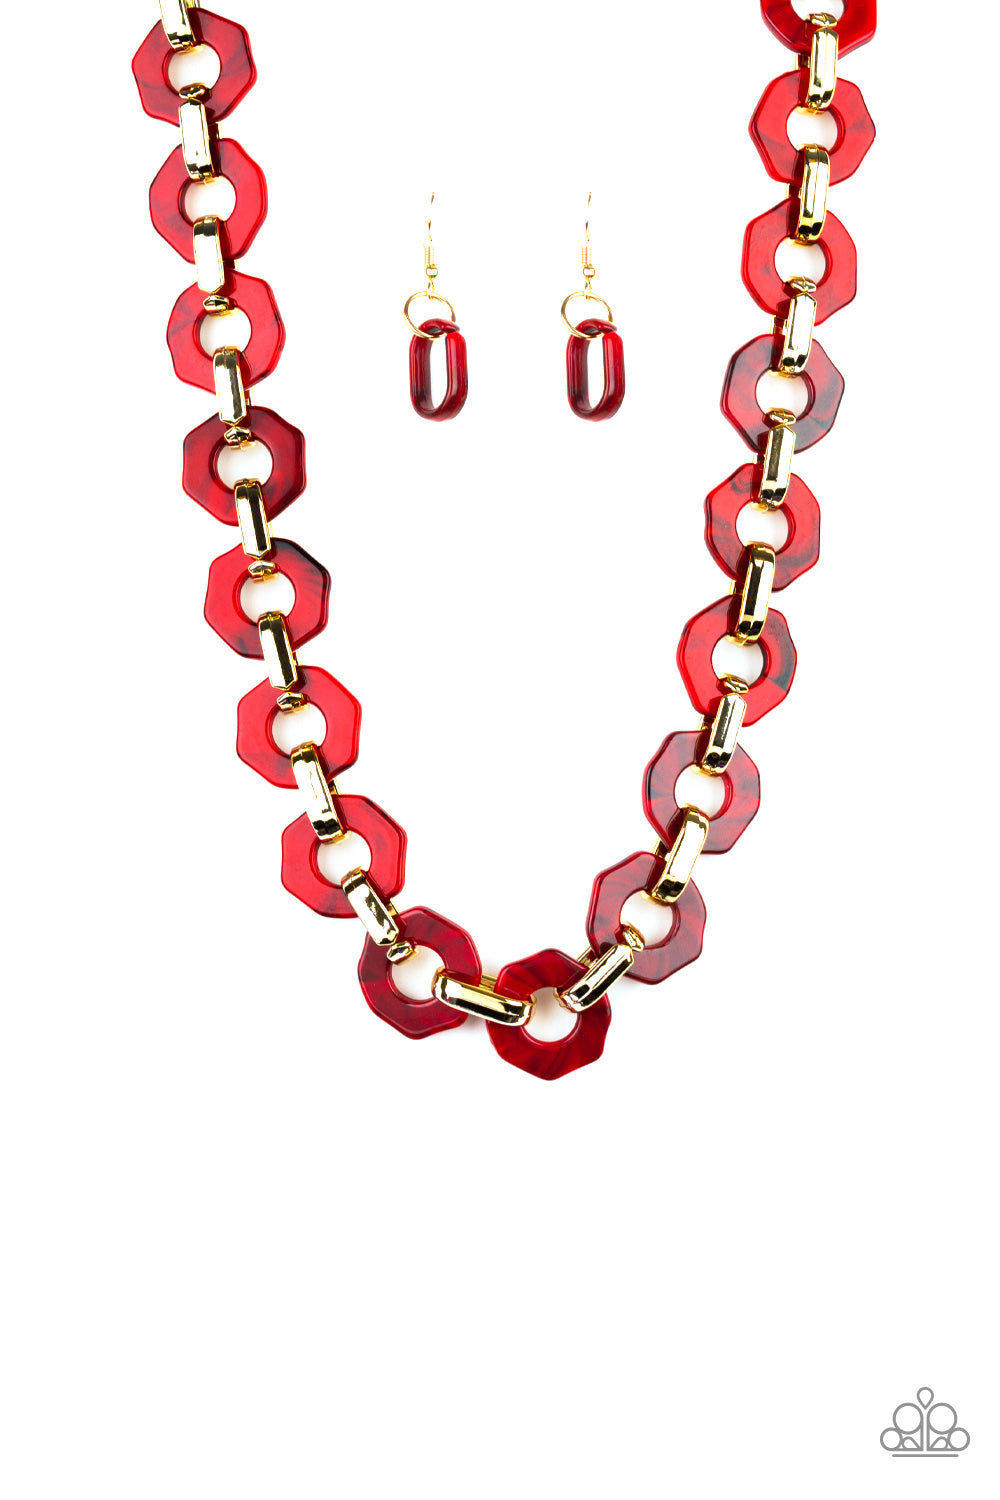 Fashionista Fever - Red Necklace - TheMasterCollection